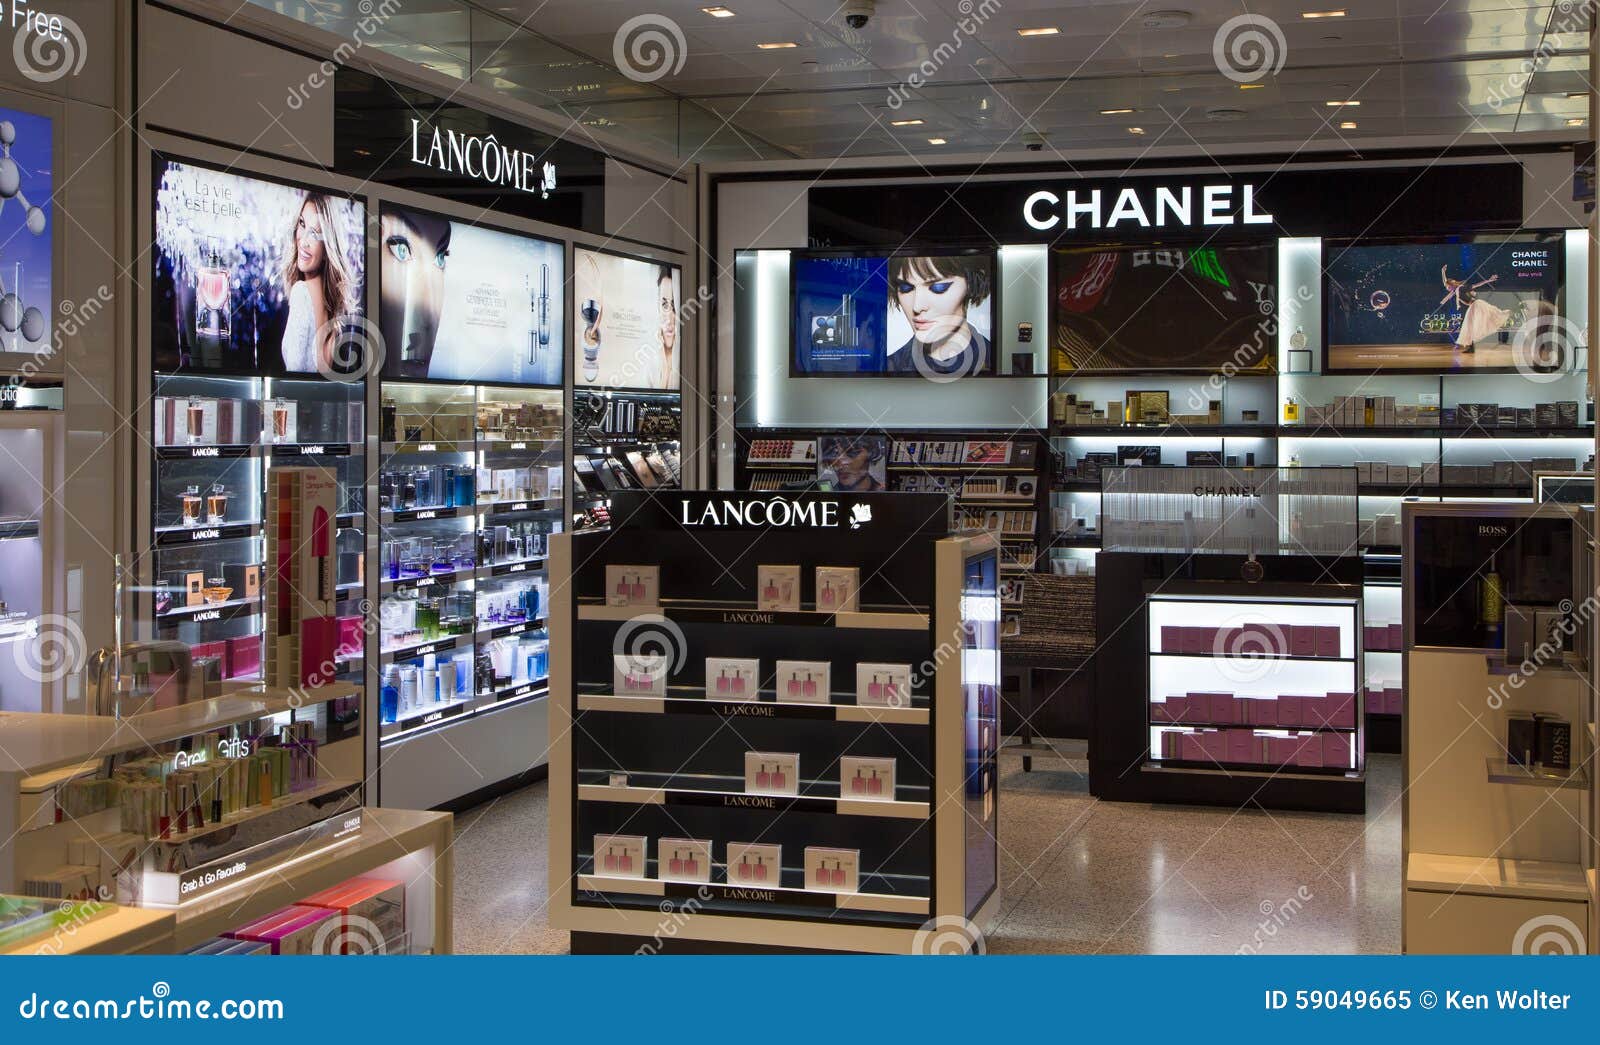 Lancome and Chanel Store Display Editorial Image - Image of beauty ...